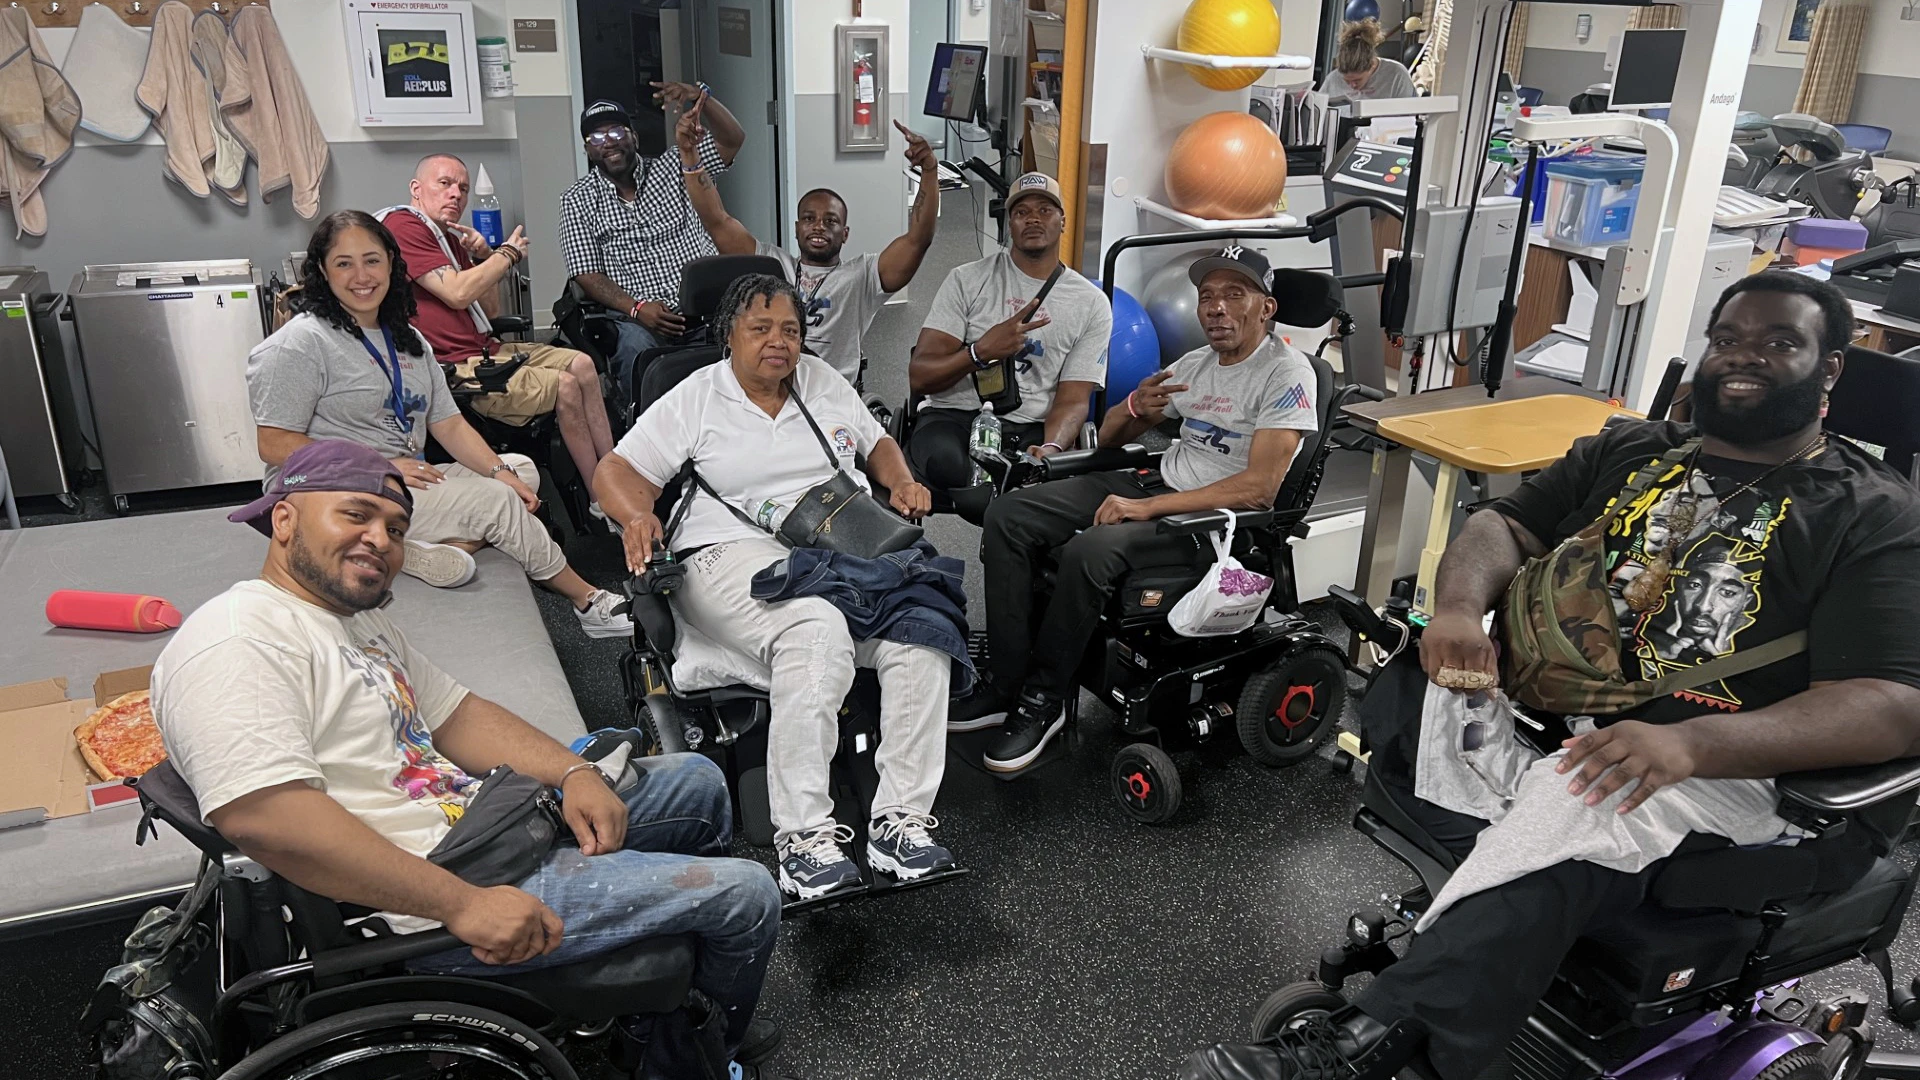 The initiative is growing and adding new programs, including this pictured session of the Gun Violence Support Group in June 2023, for people who have experienced or survived gun violence. Various programs have also resumed group outings and activities to foster community among SCI patients.